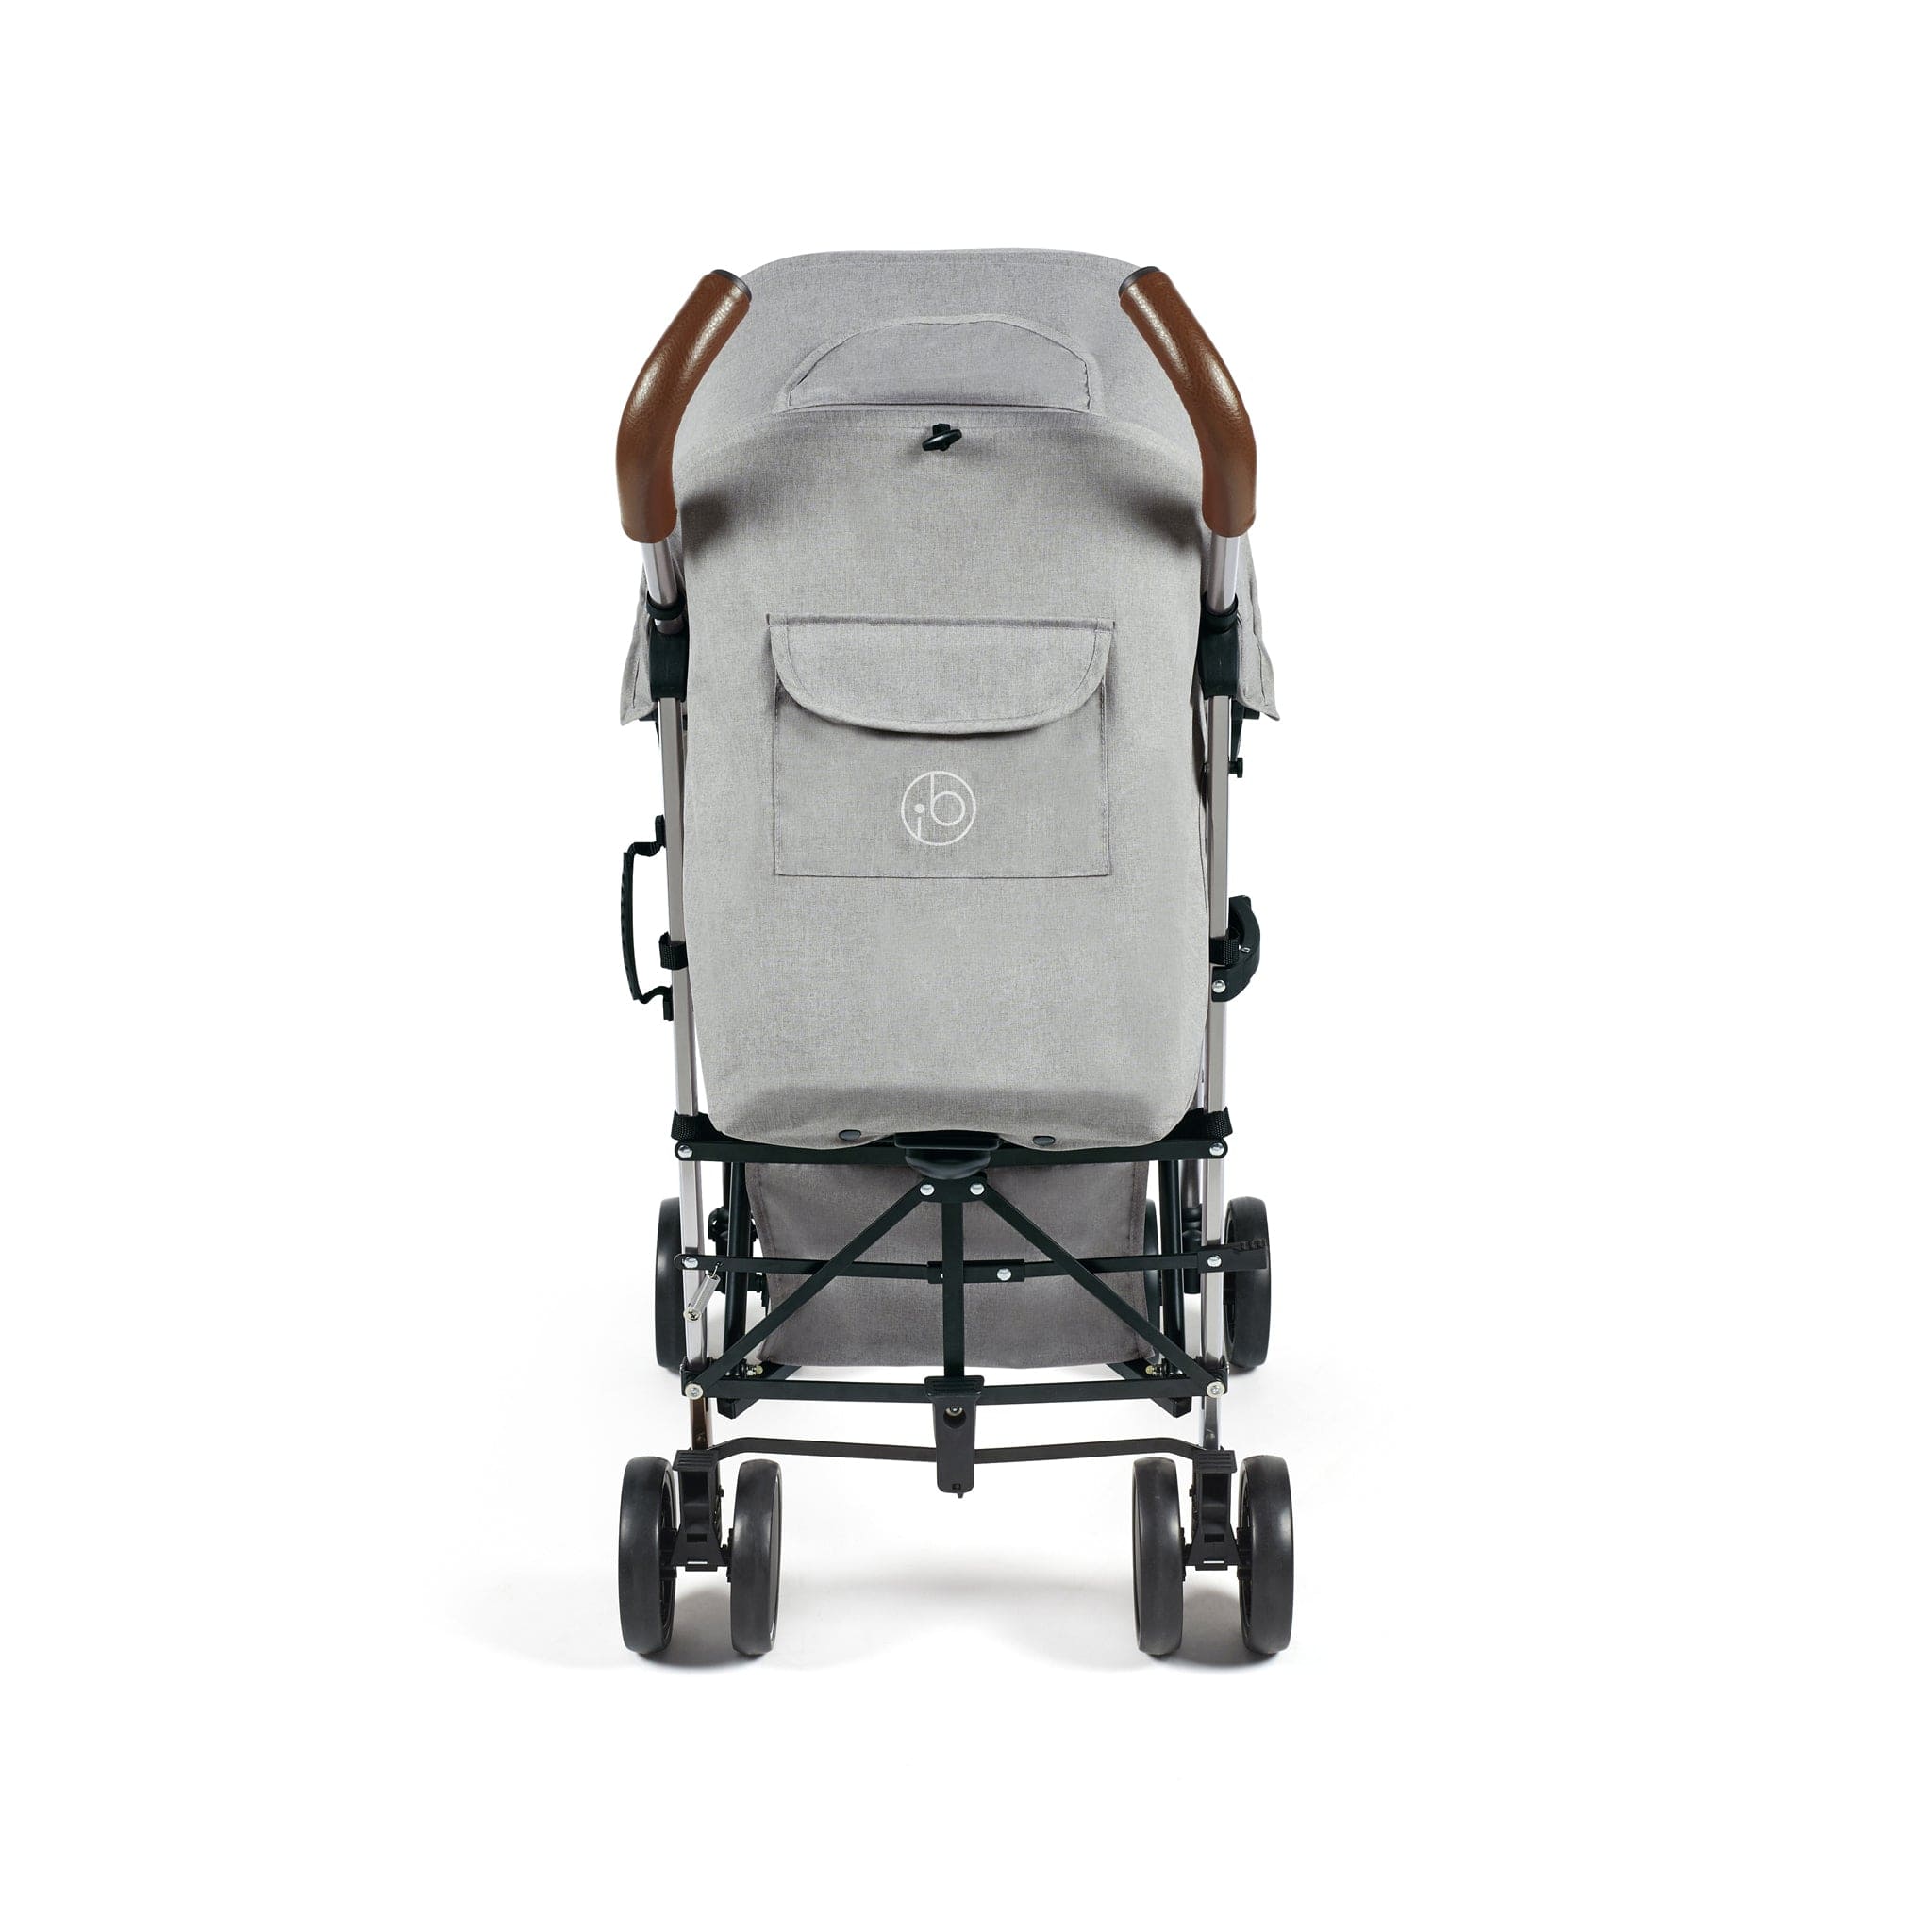 Ickle Bubba Discovery Stroller Silver/Grey Pushchairs & Buggies 15-002-100-056 0700355999065